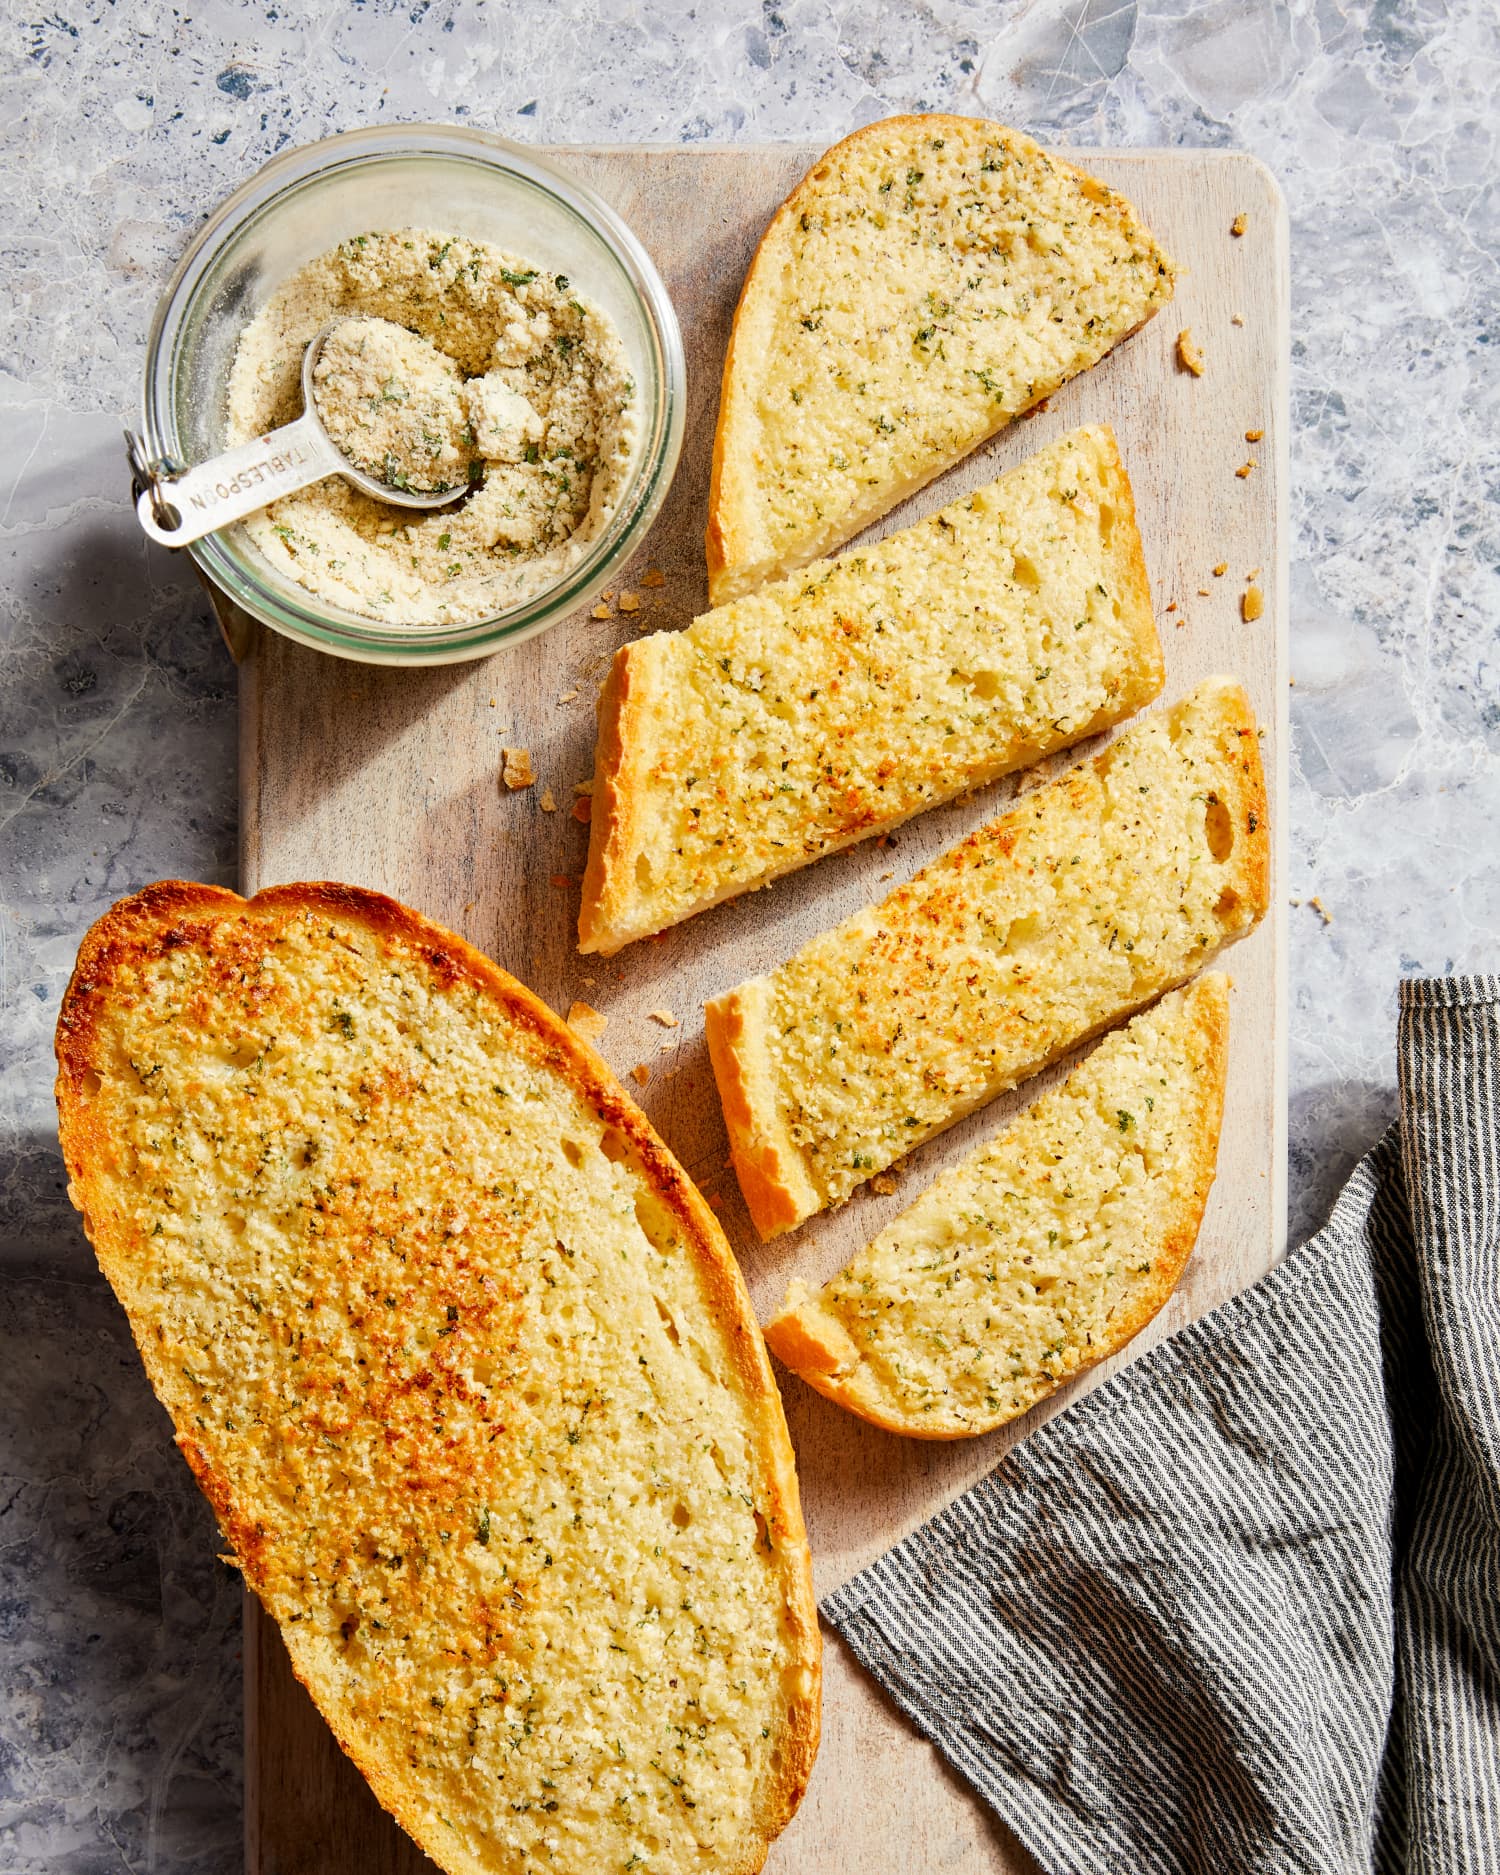 Garlic Confit Toast Is the Sweet and Nutty Upgrade You’ll Want to Make This Week